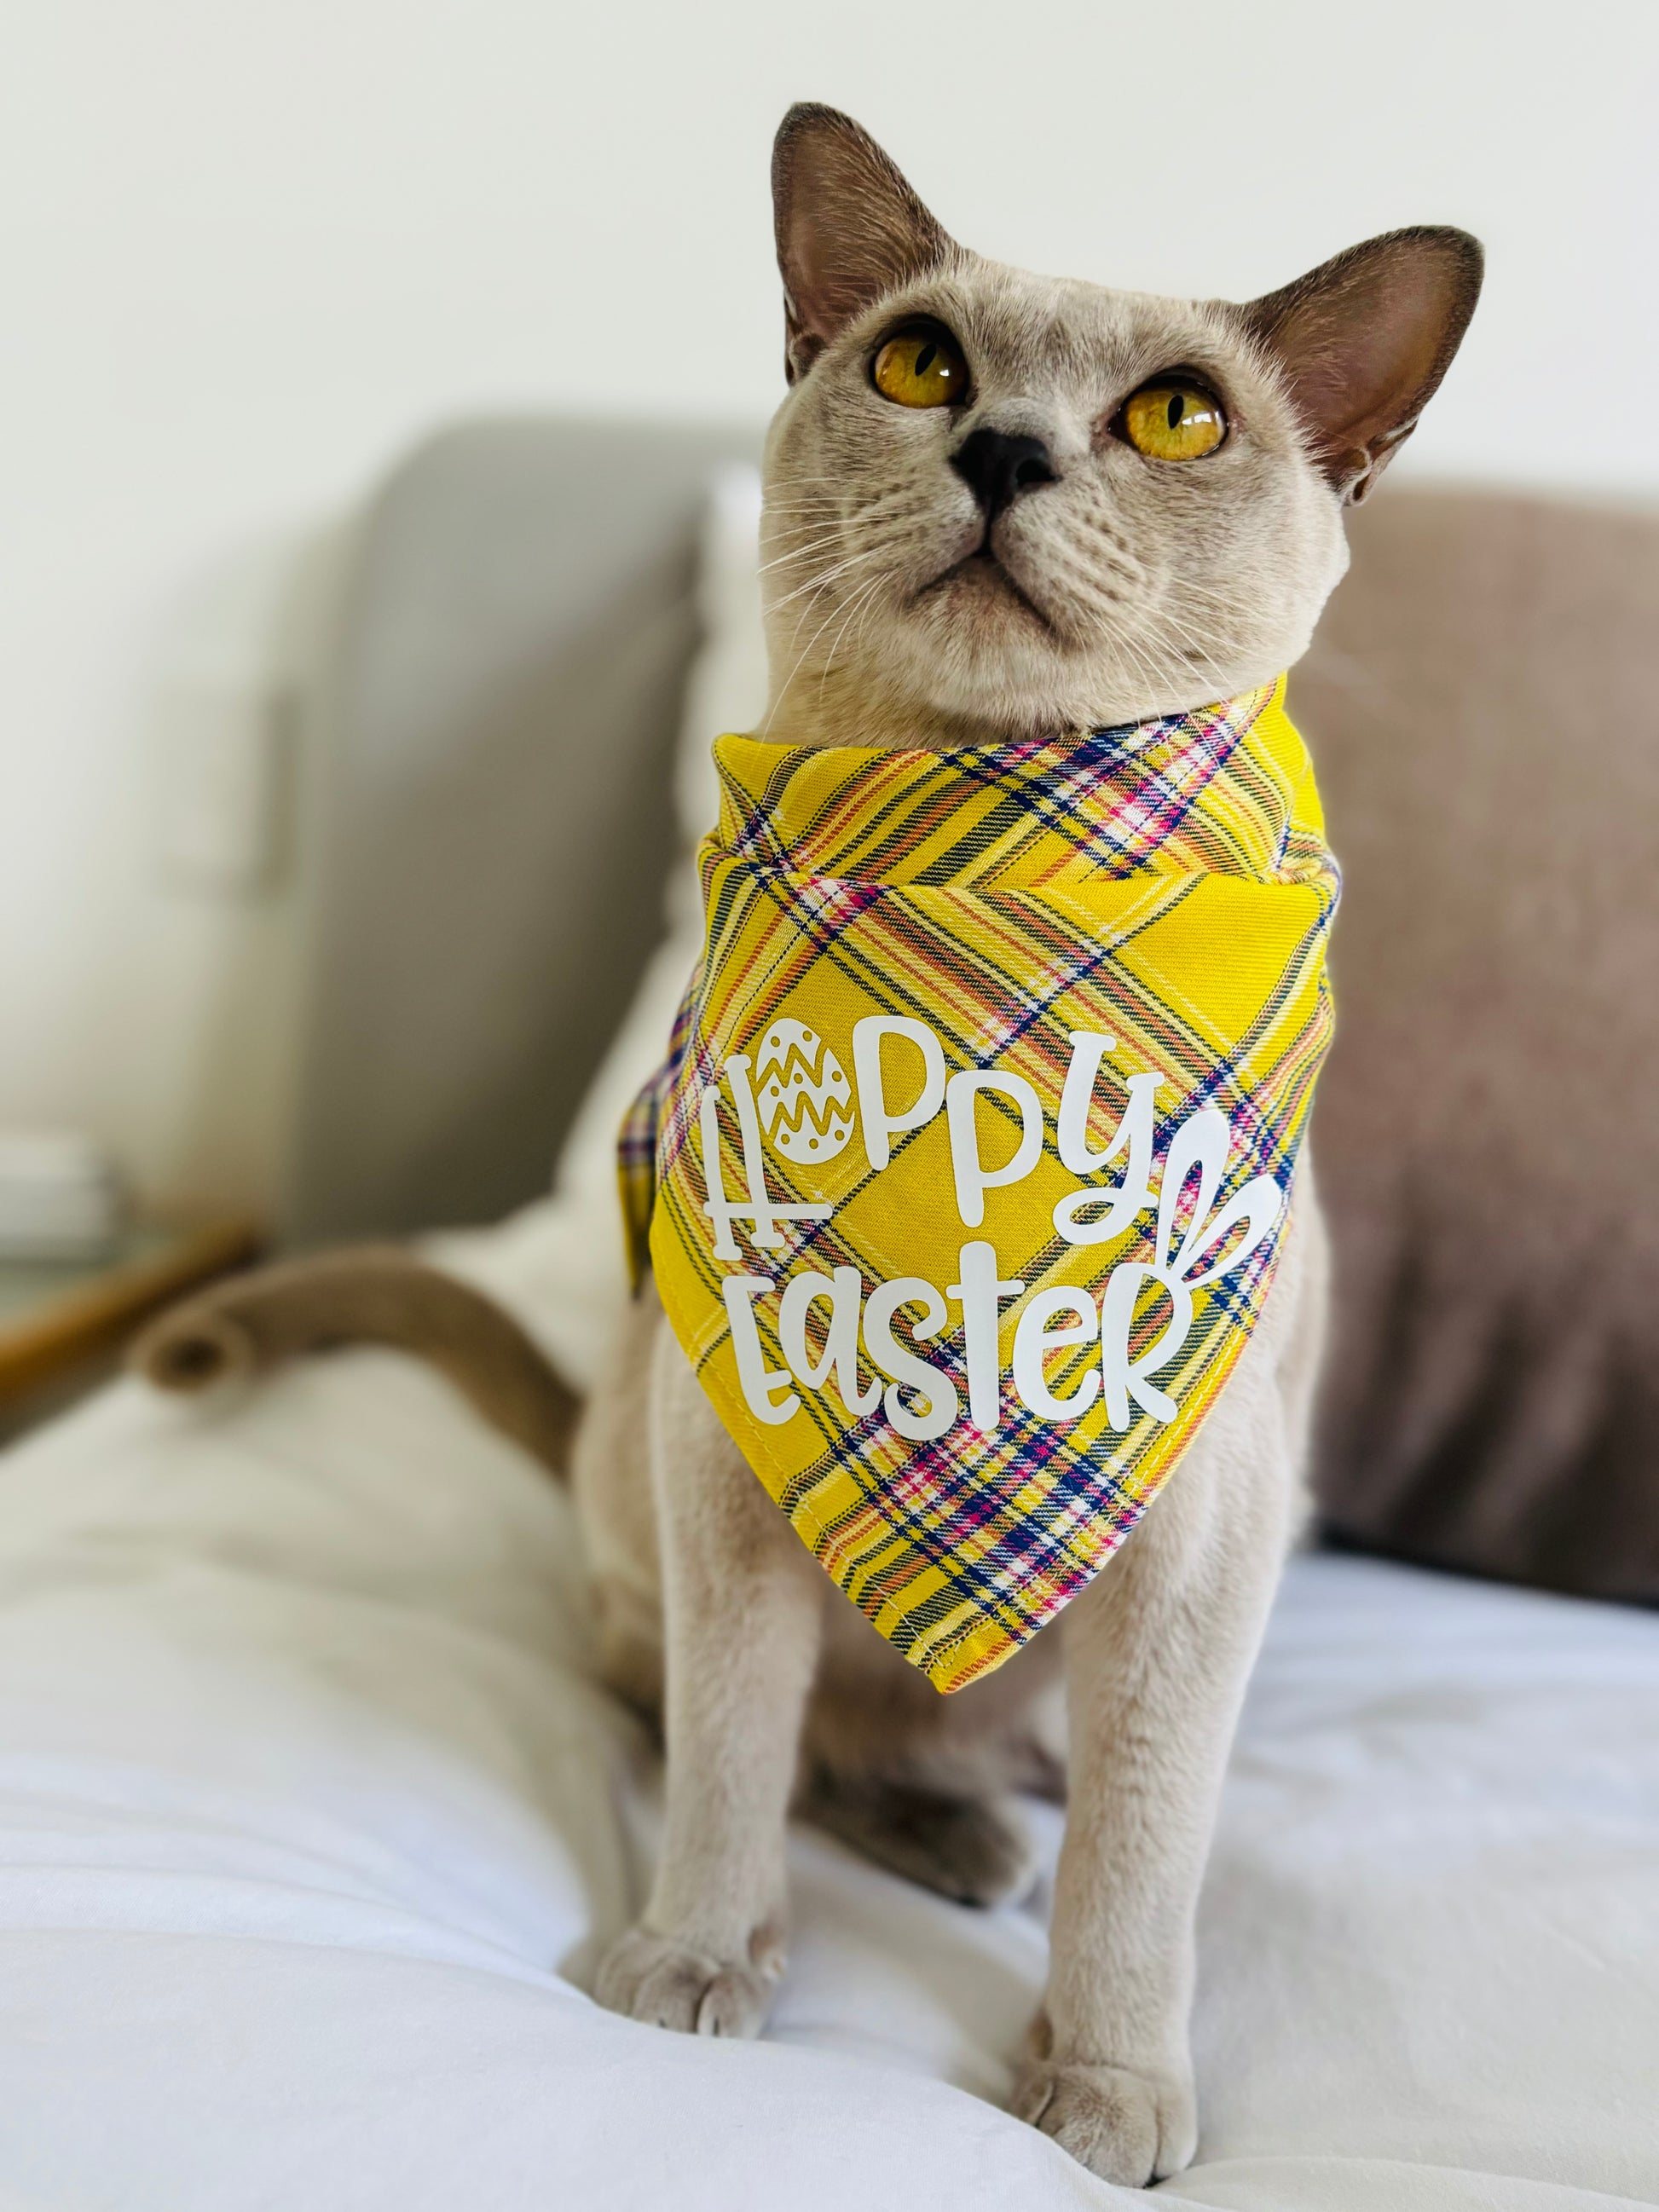 Cat Wearing Yellow Bandana: Adorable Easter pet bandanas with charming gingham patterns, made from breathable and durable cotton for comfort and style. Adjustable neck circumference of 25-42 cm ensures a perfect fit for pets of all sizes. Elevate your pet's Easter style.